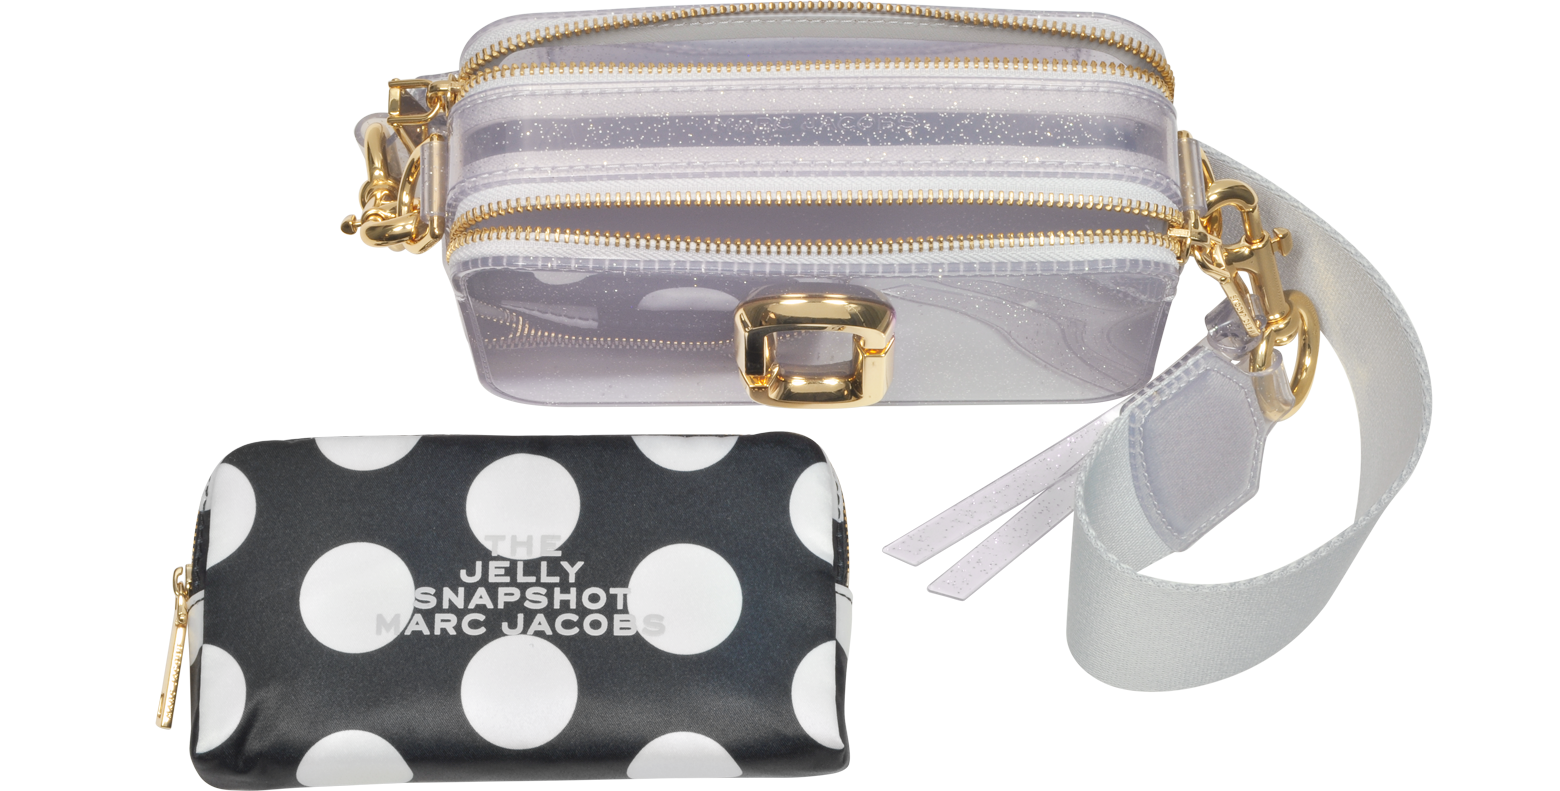 Marc Jacobs The Jelly Snapshot Small Camera Bag In Black/gold